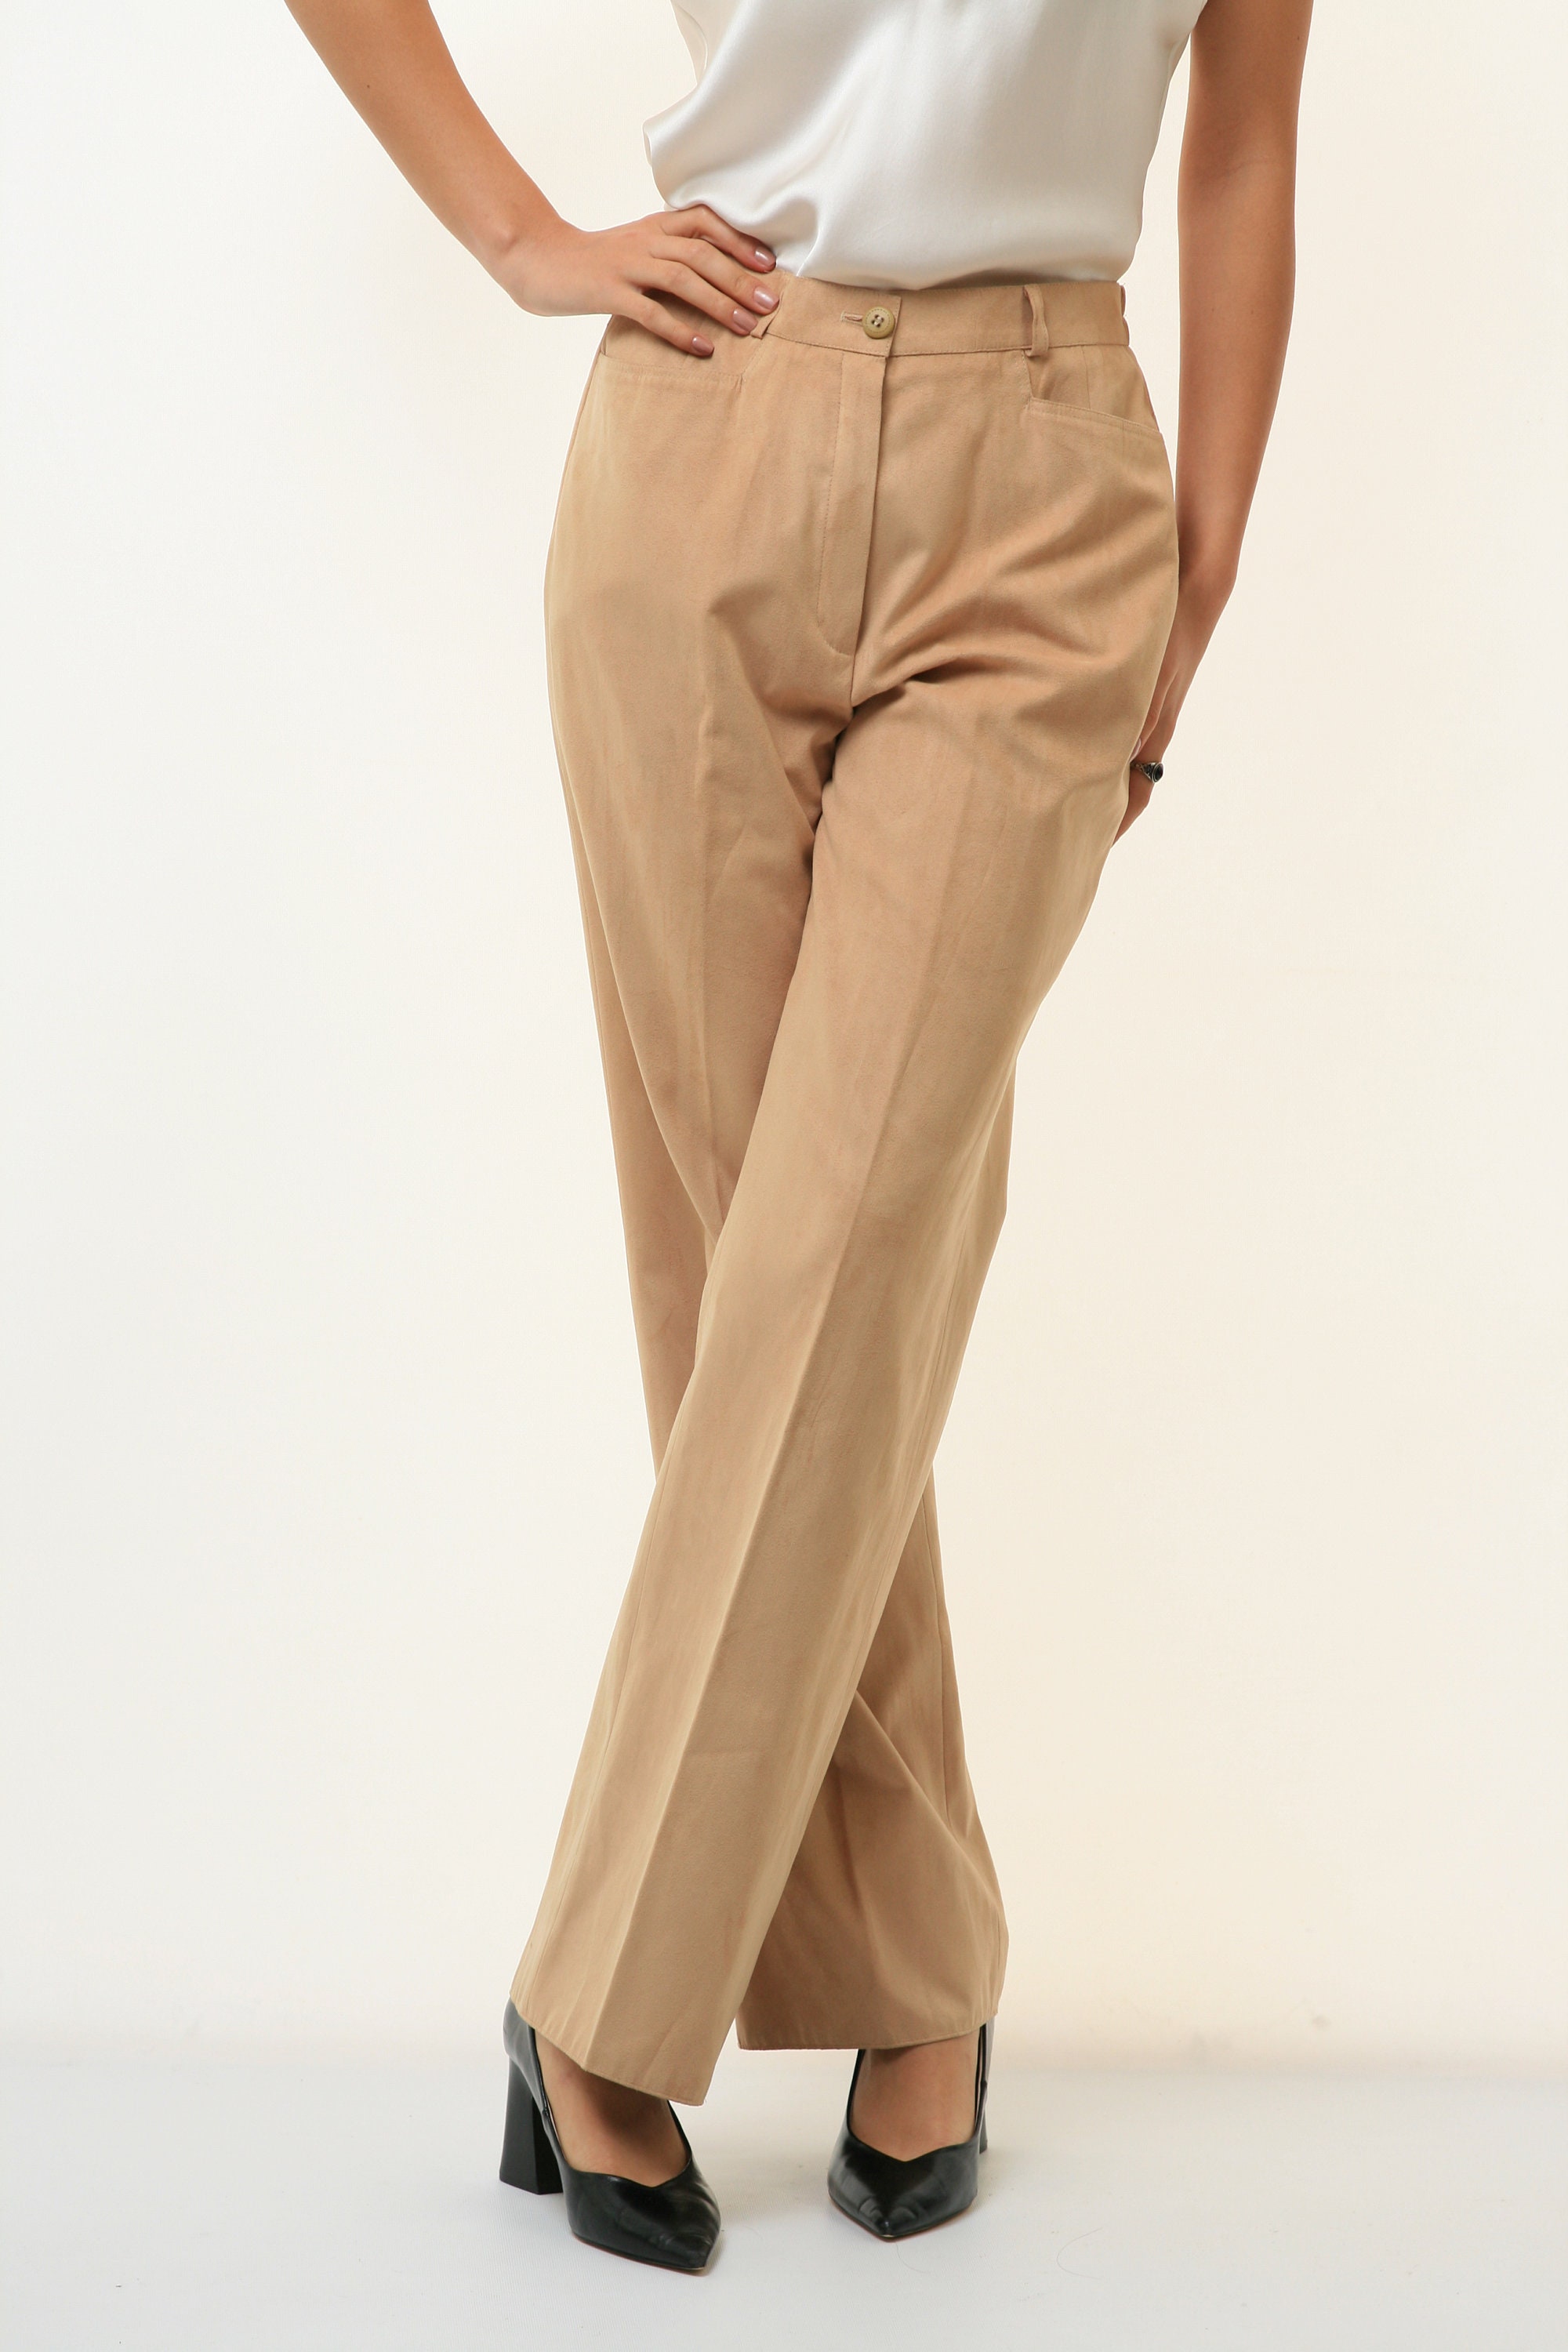 80s Vintage Woman Beige High Waisted Straight Trousers Size